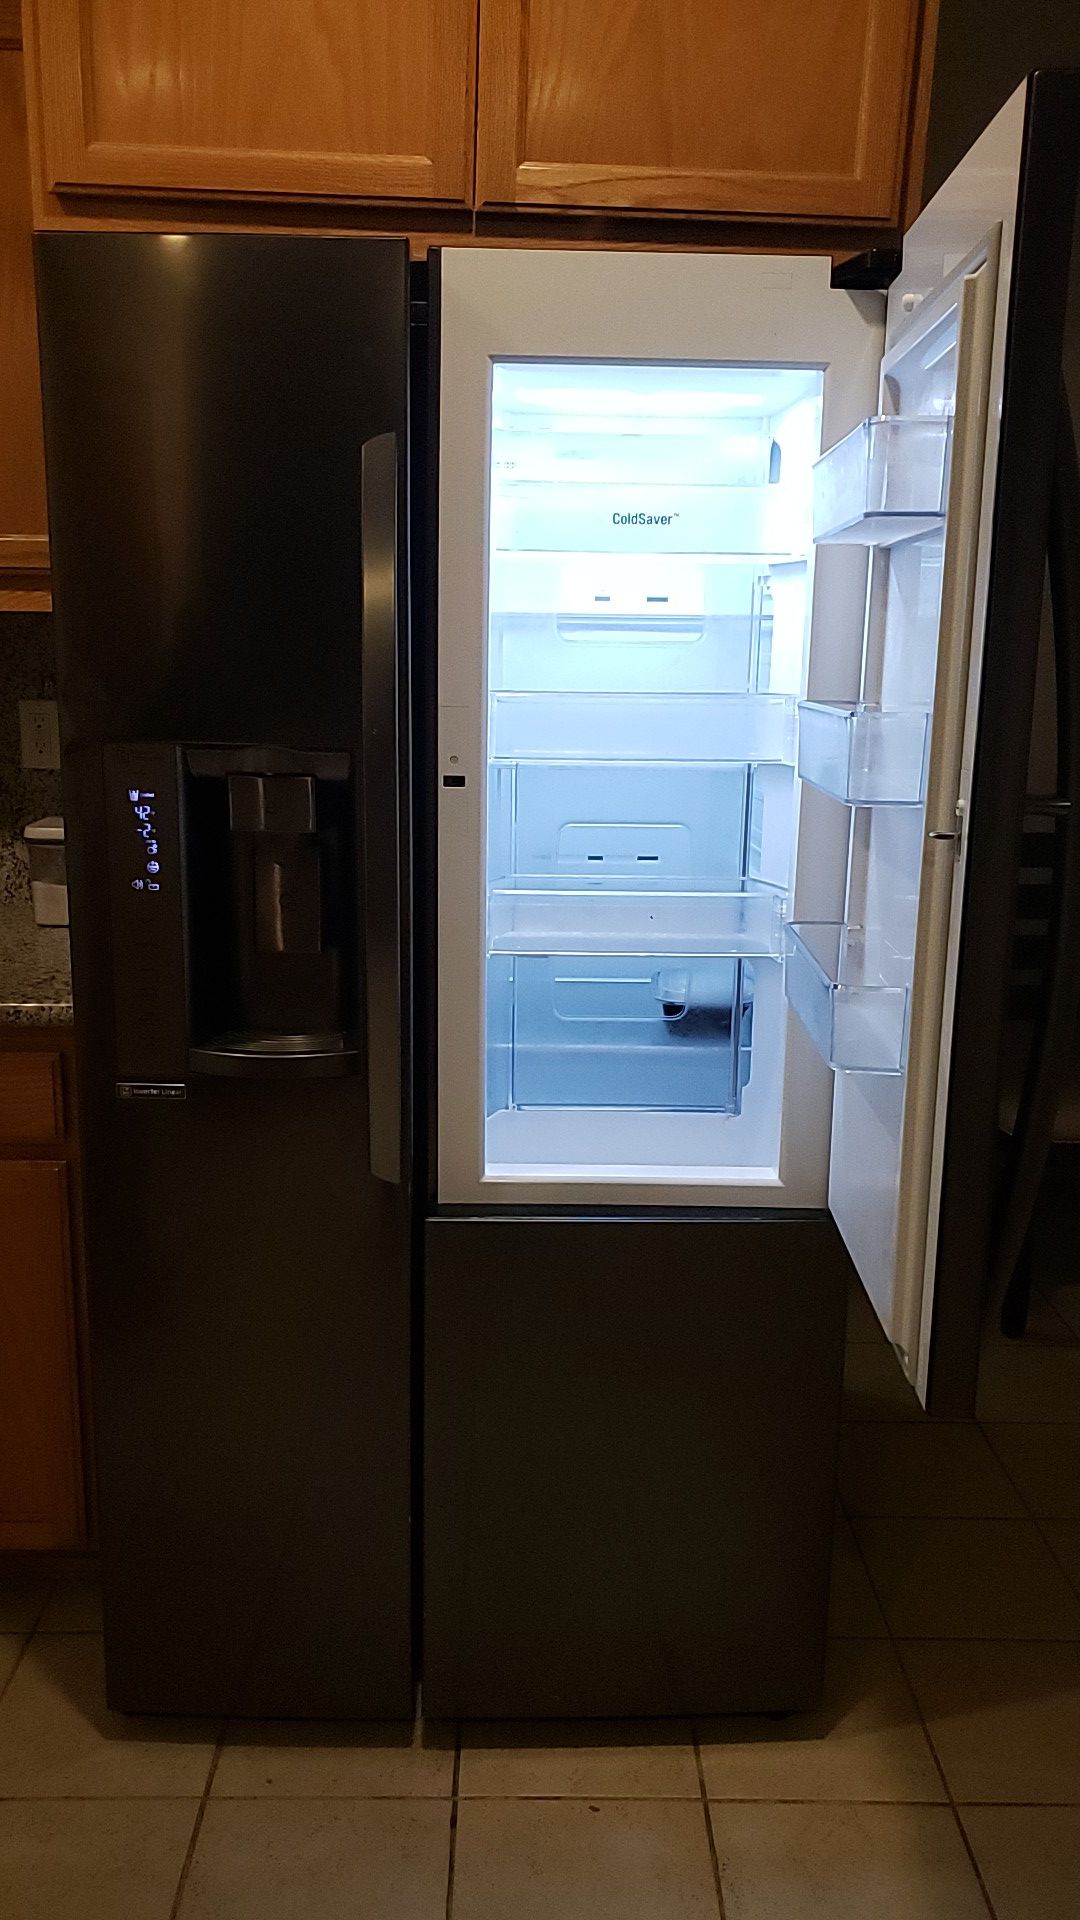 Lg double door fridge $50 first person to come get it at this price can have it. MUST BE GONE TODAY